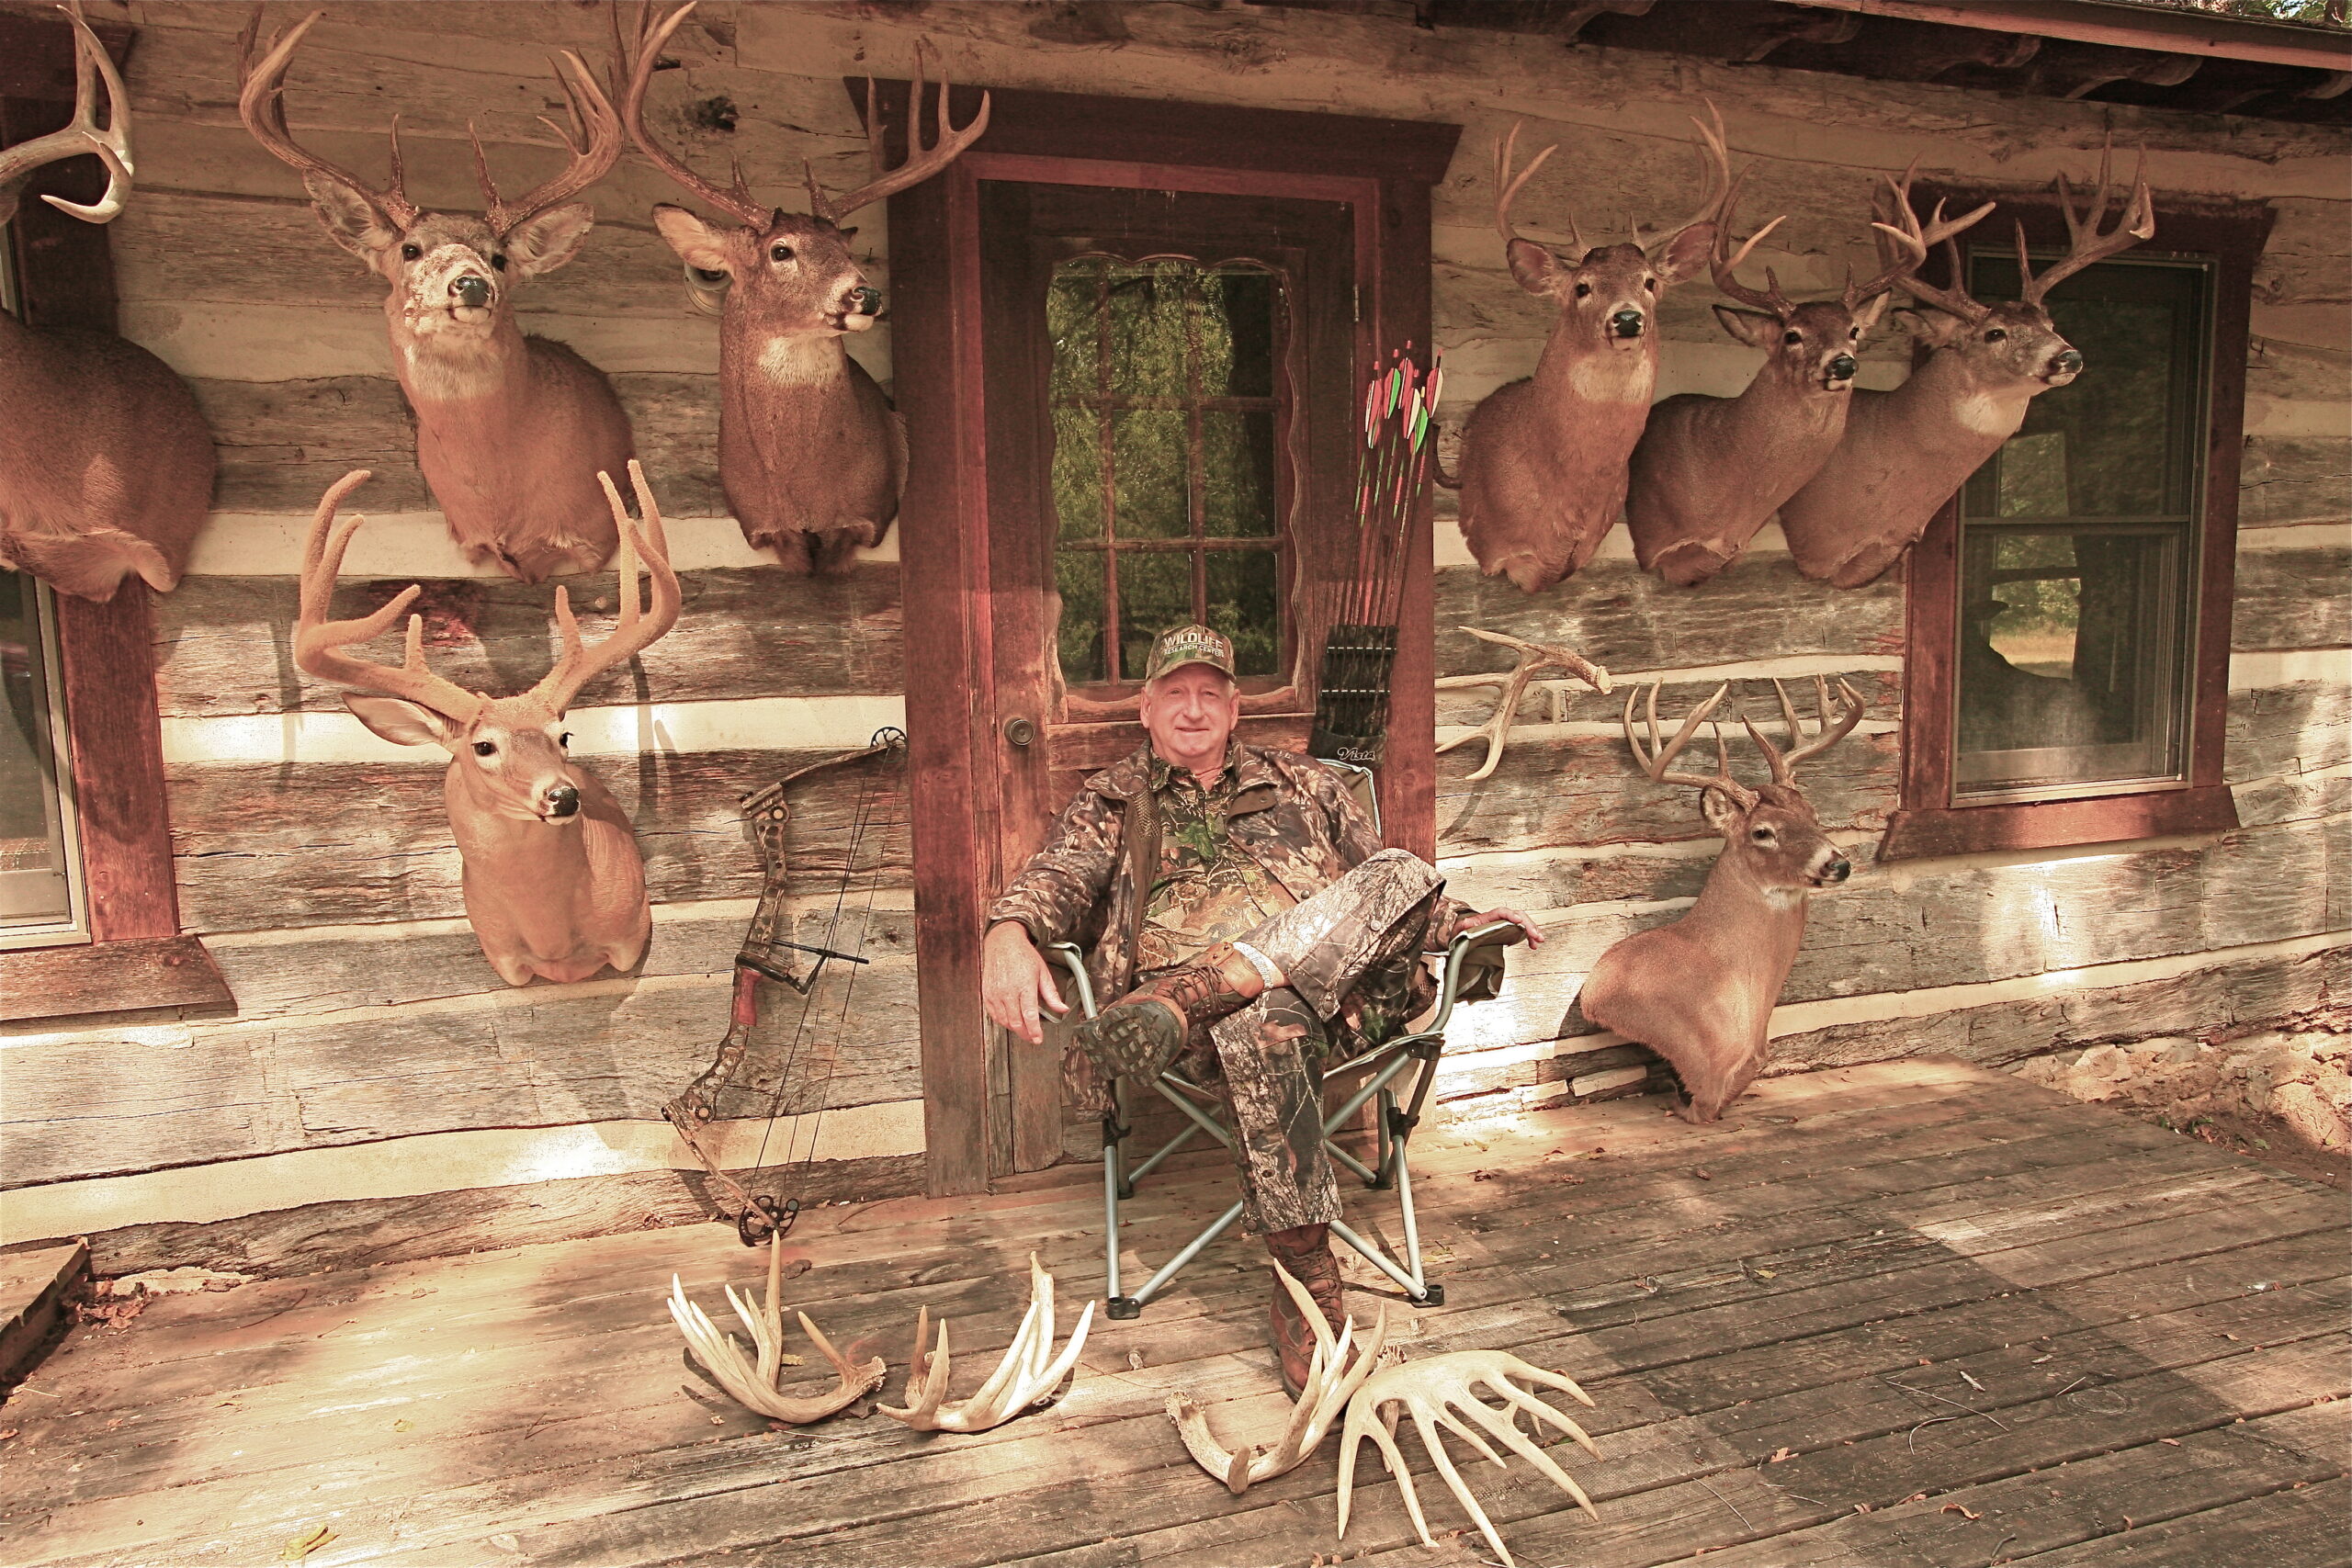 <em>Jim Brush of Galesville, Wis., poses with some of his trophy whitetails taken while bowhunting from the ground.</em>